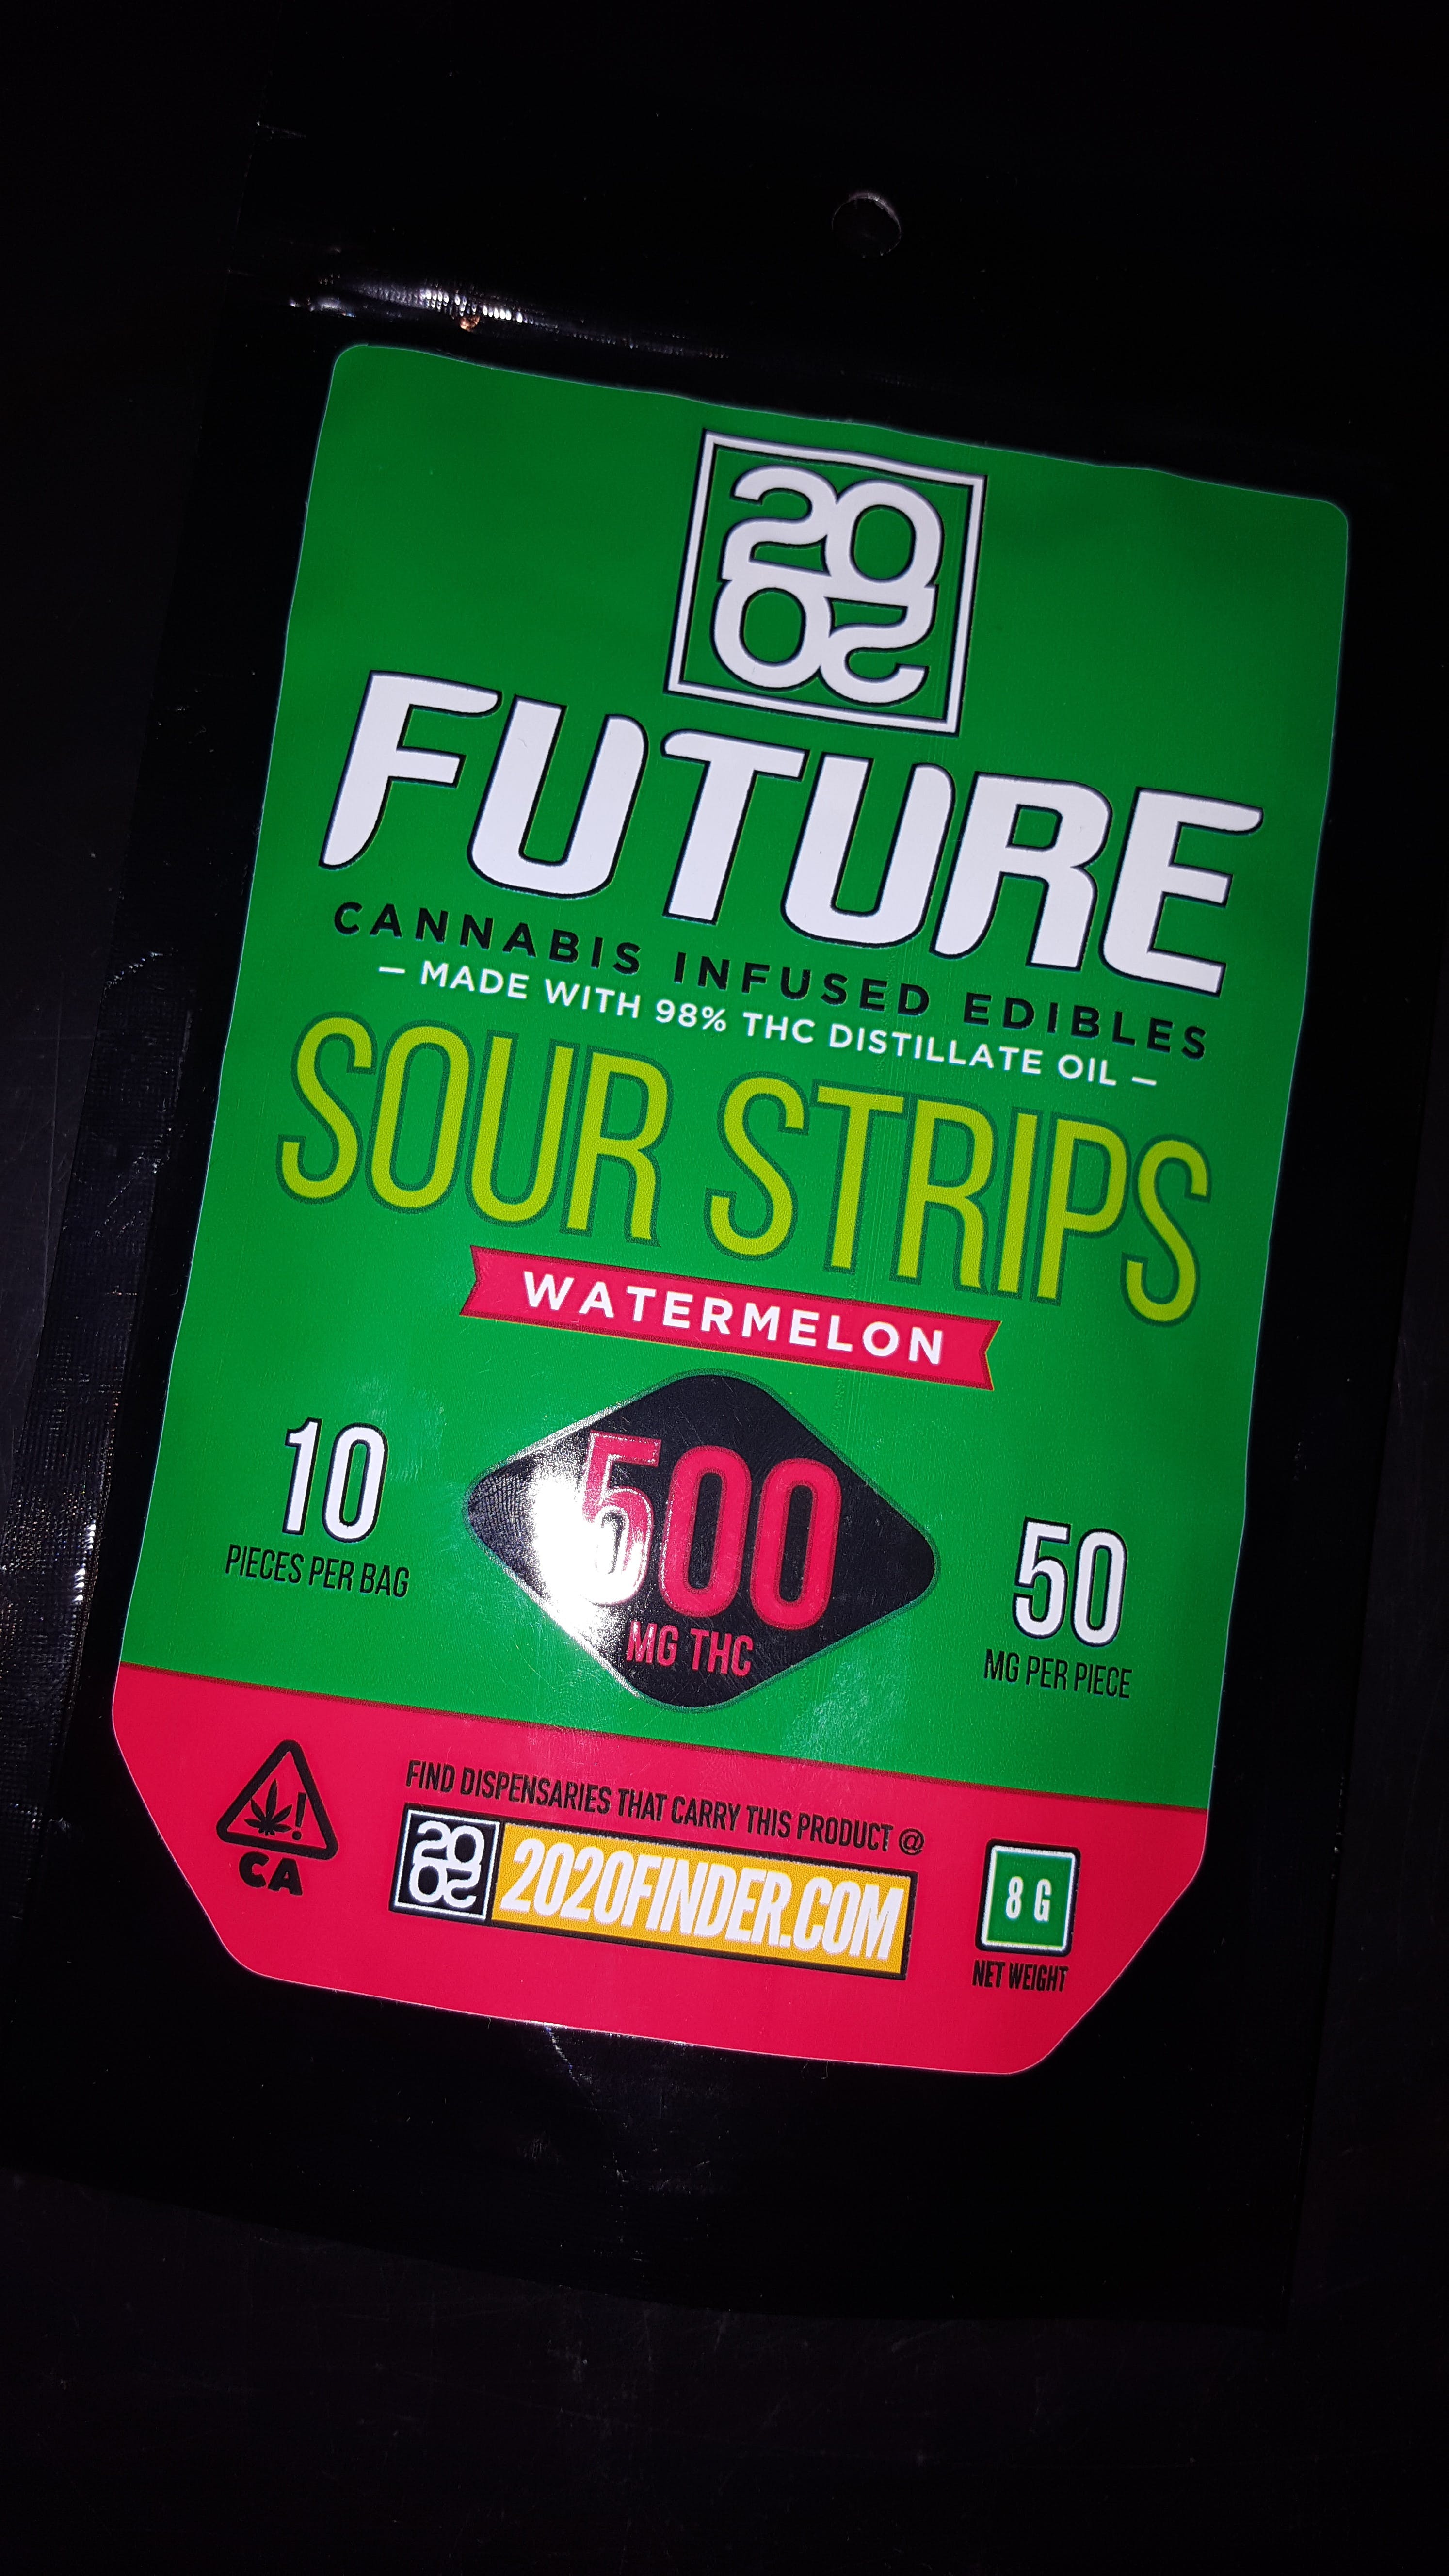 marijuana-dispensaries-8714-vermont-ave-2c-los-angeles-2c-ca-90044-los-angeles-2020-future-cannabis-infused-watermelon-sour-strips-500-mgs